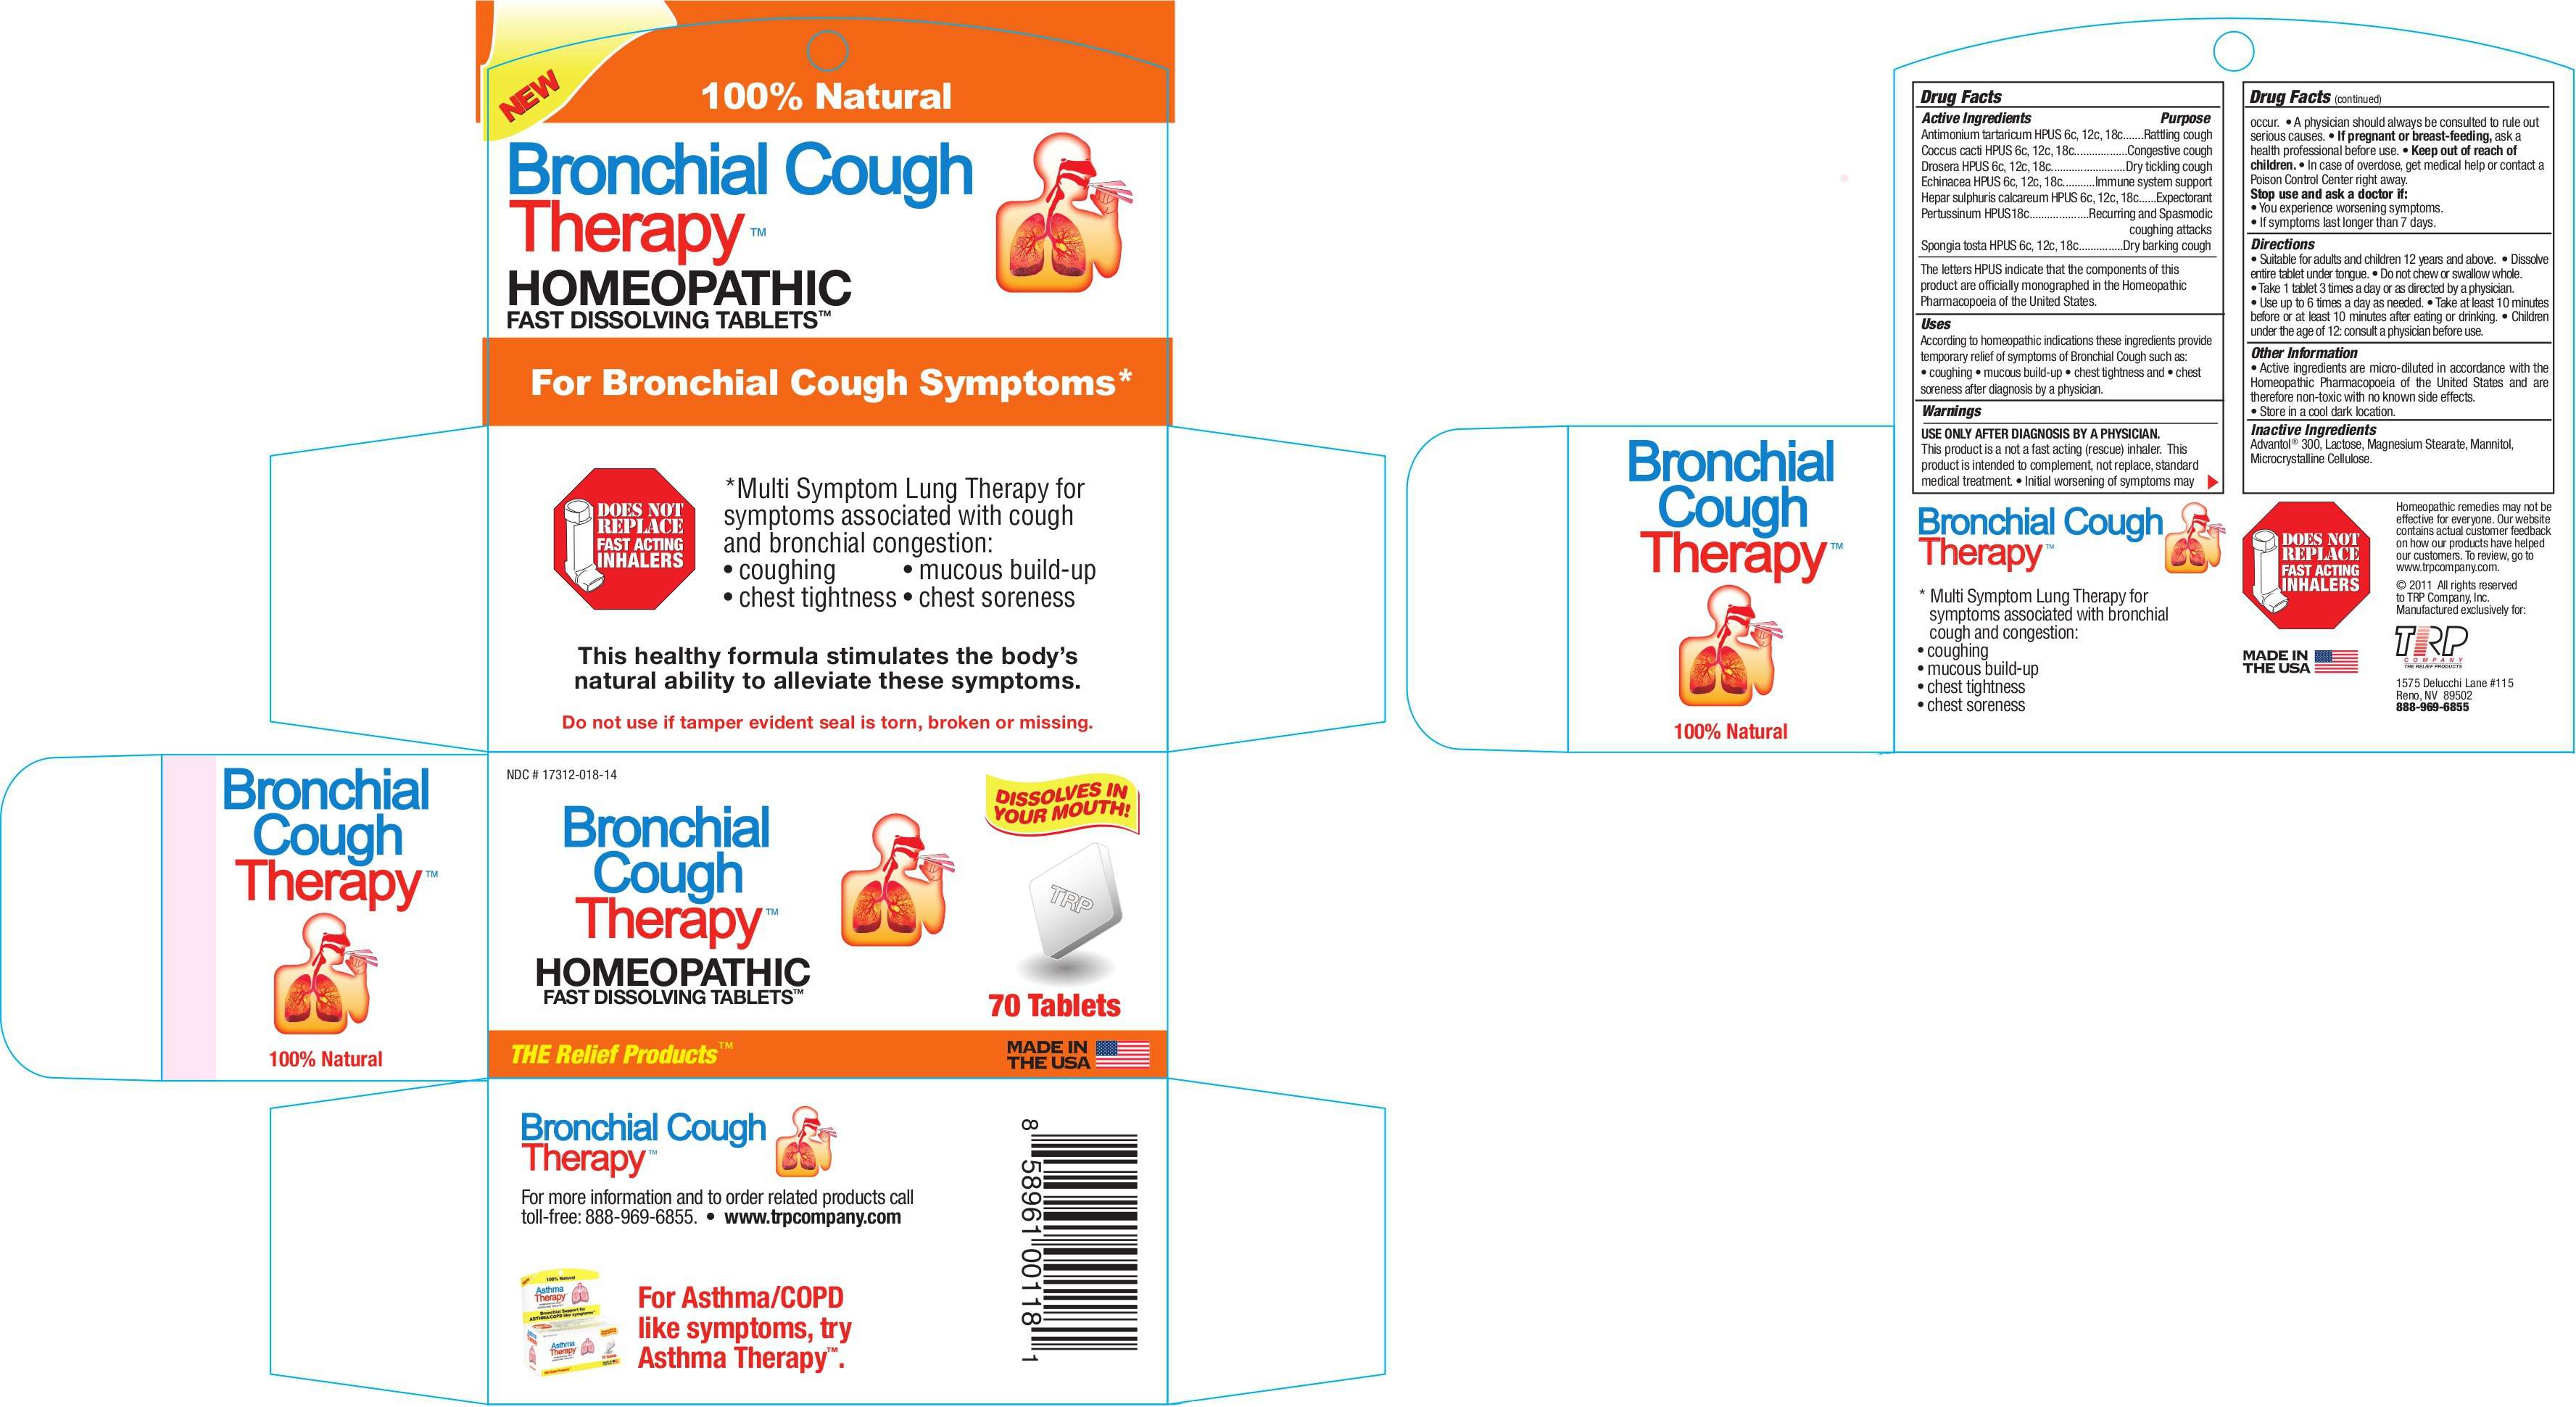 Bronchial Cough Therapy